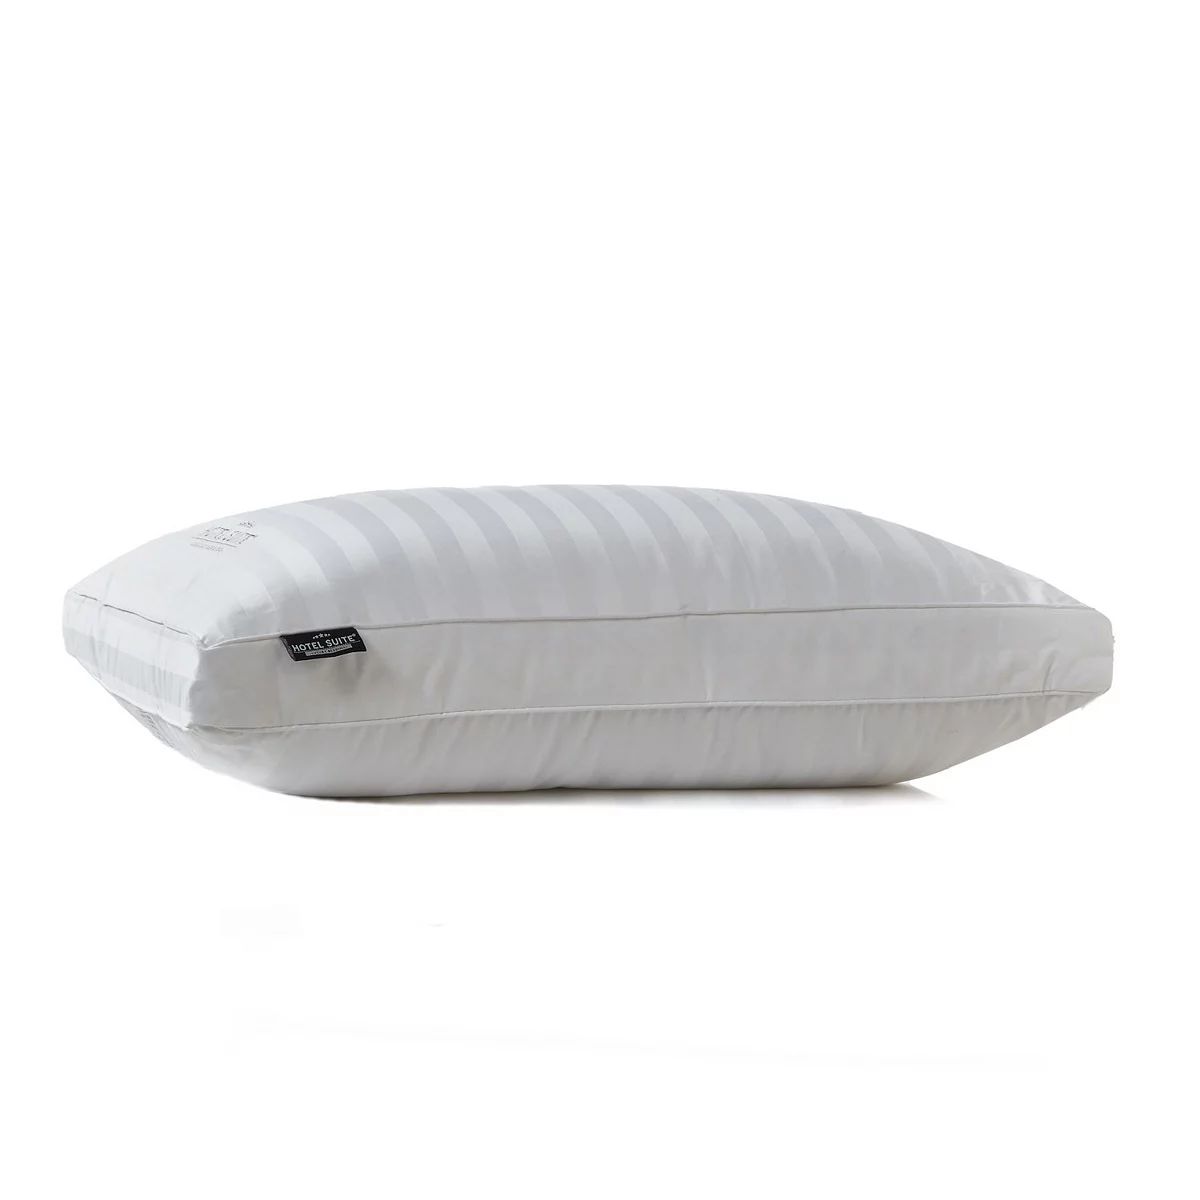 Hotel Suite White Goose Feather Firm Pillow | Kohl's